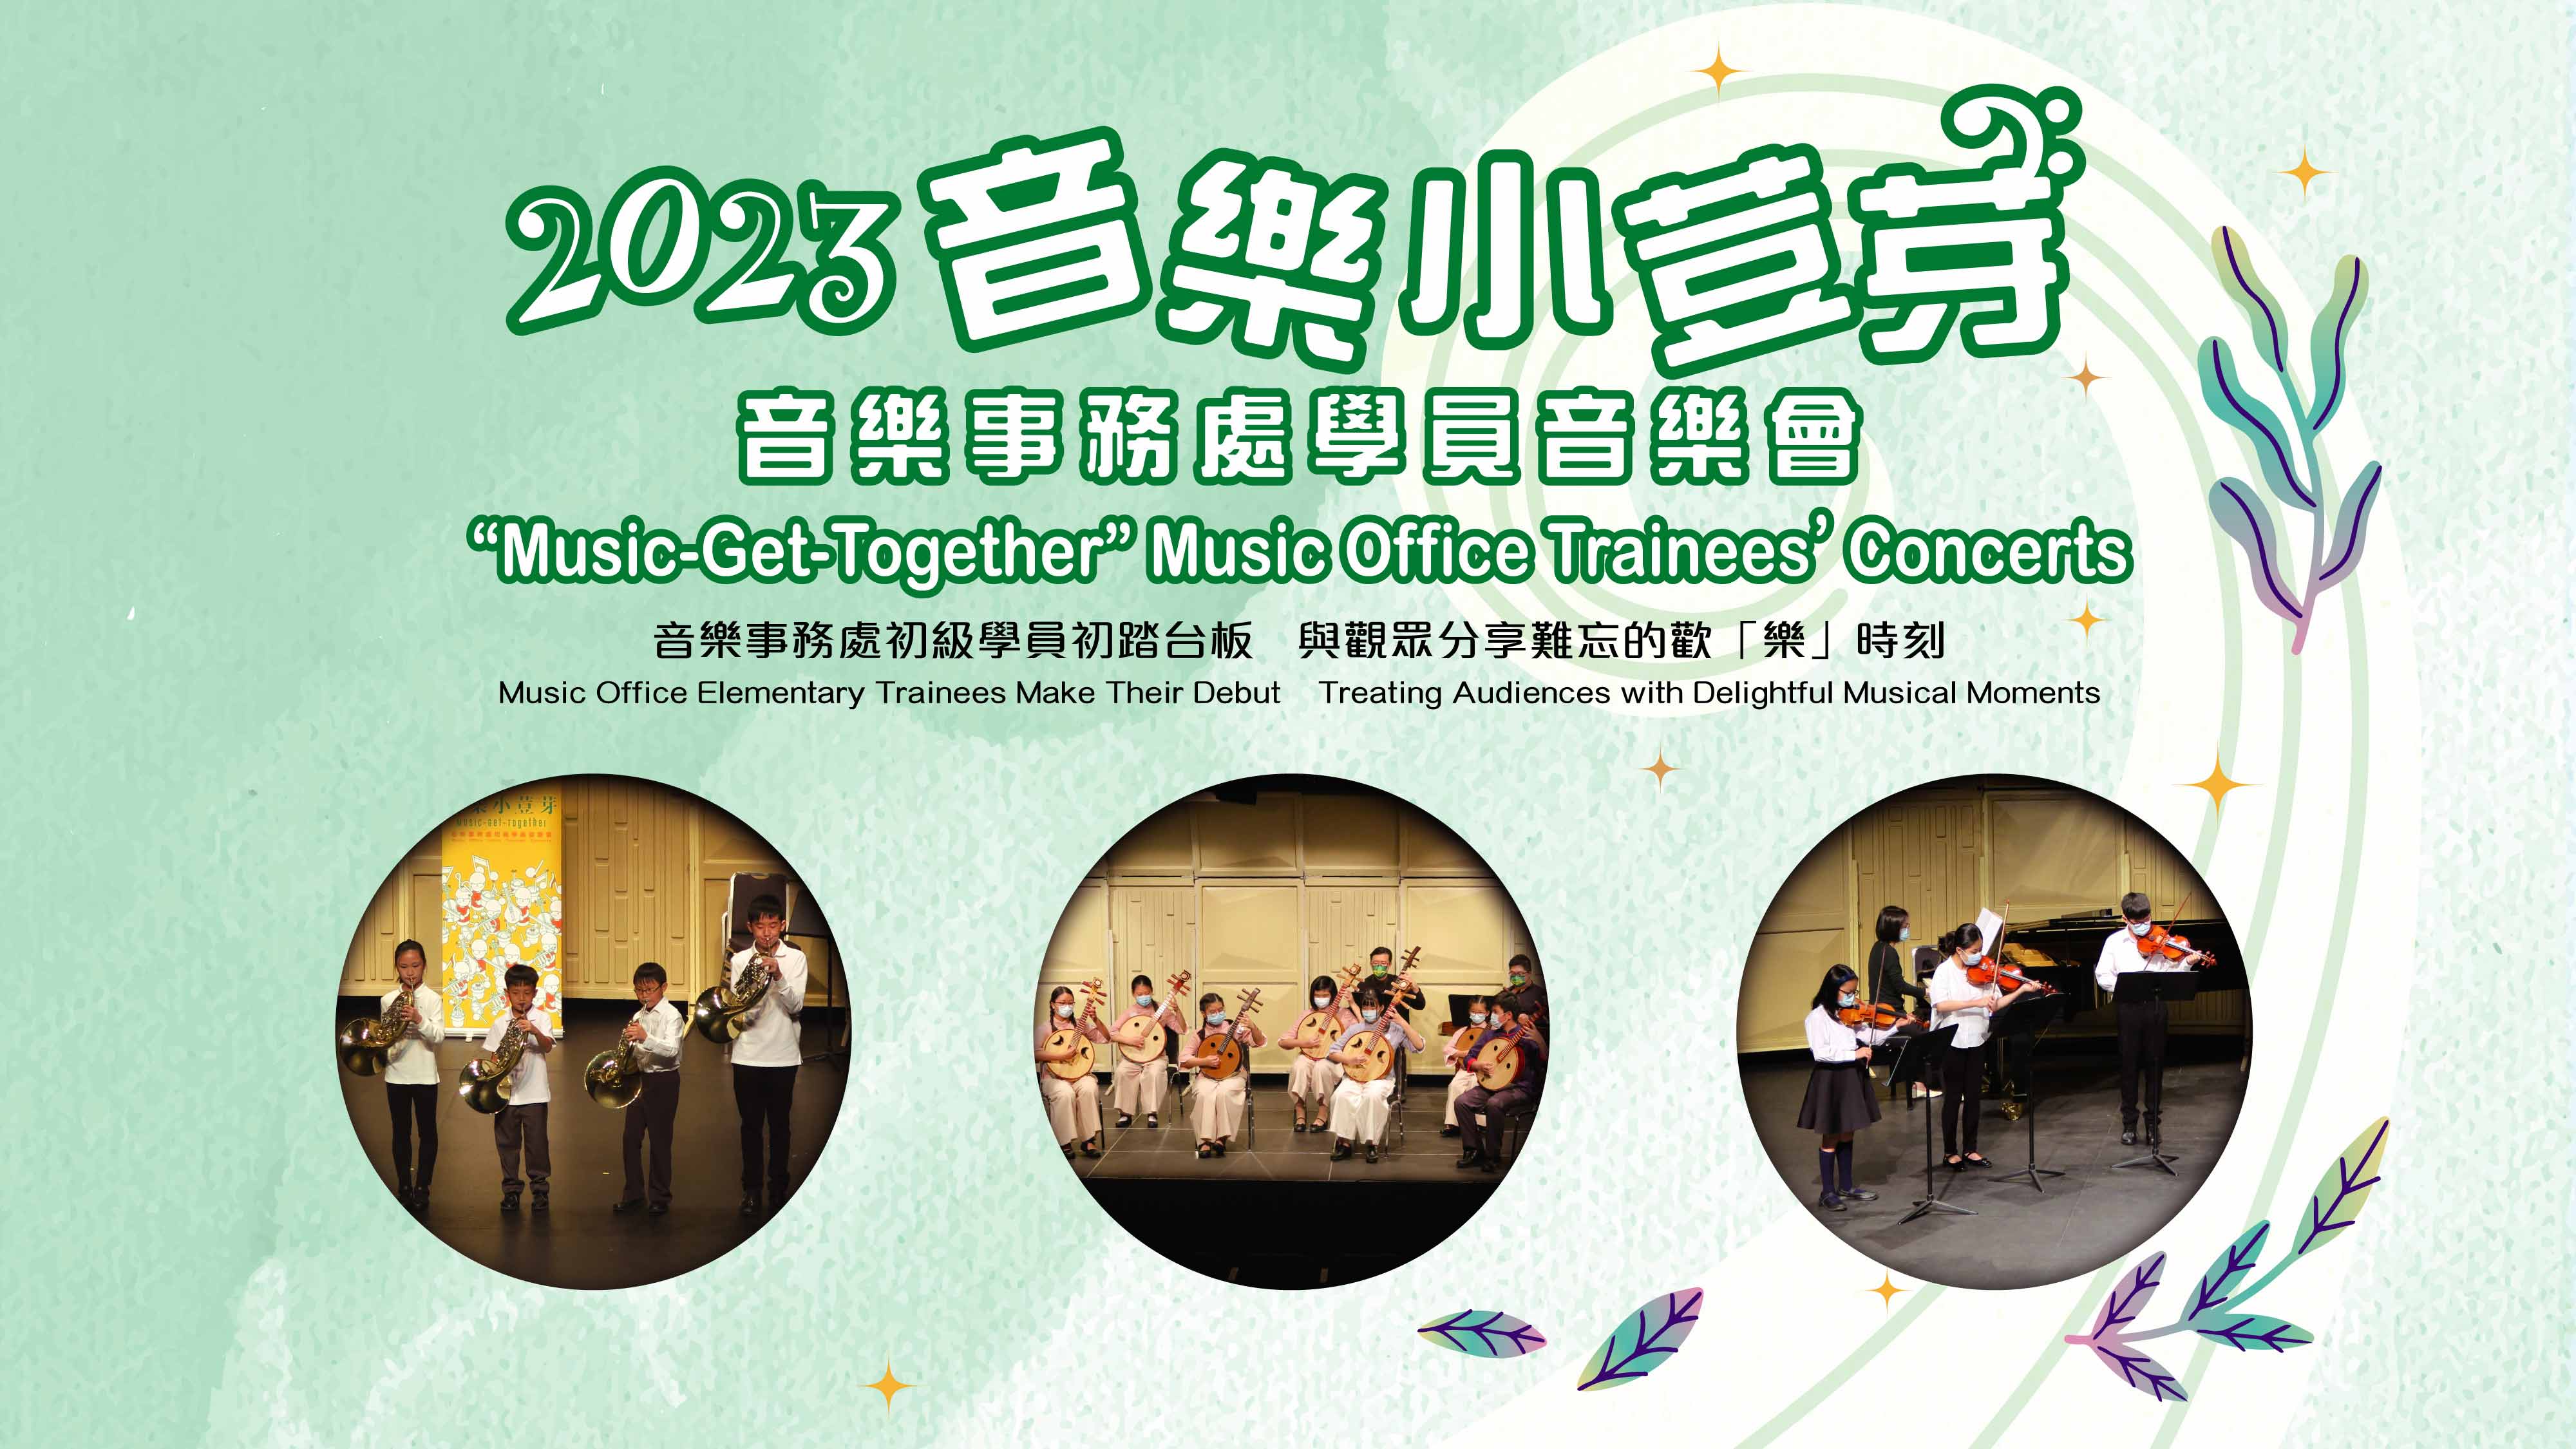 2023"Music-Get-Together" Music Office Trainees' Concerts